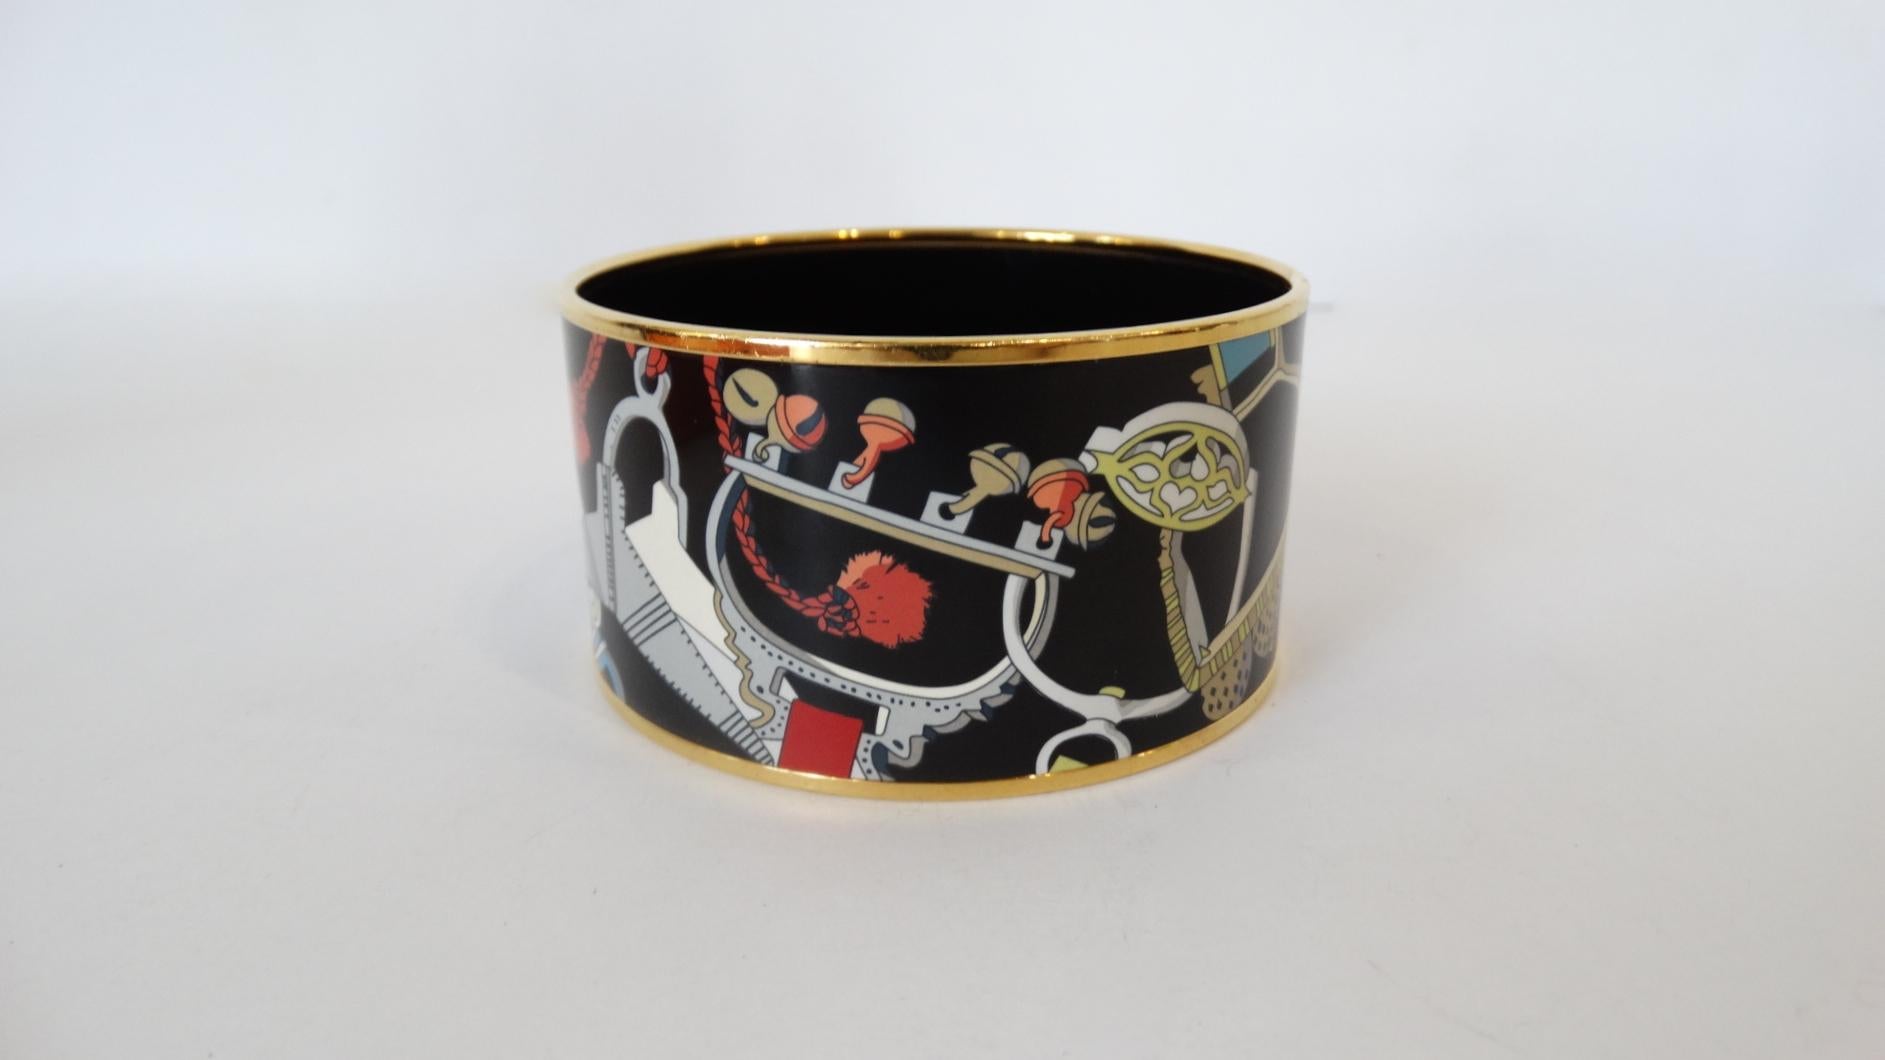 Accessorize Your Outfit With This Rare Hermes Paris Les Etriers Cuff! Contrasting against the black Enamel background is a detailed and beautifully colored Enamel motif of the signature Hermes Les Etriers (meaning stirrups) wrapping around the cuff.